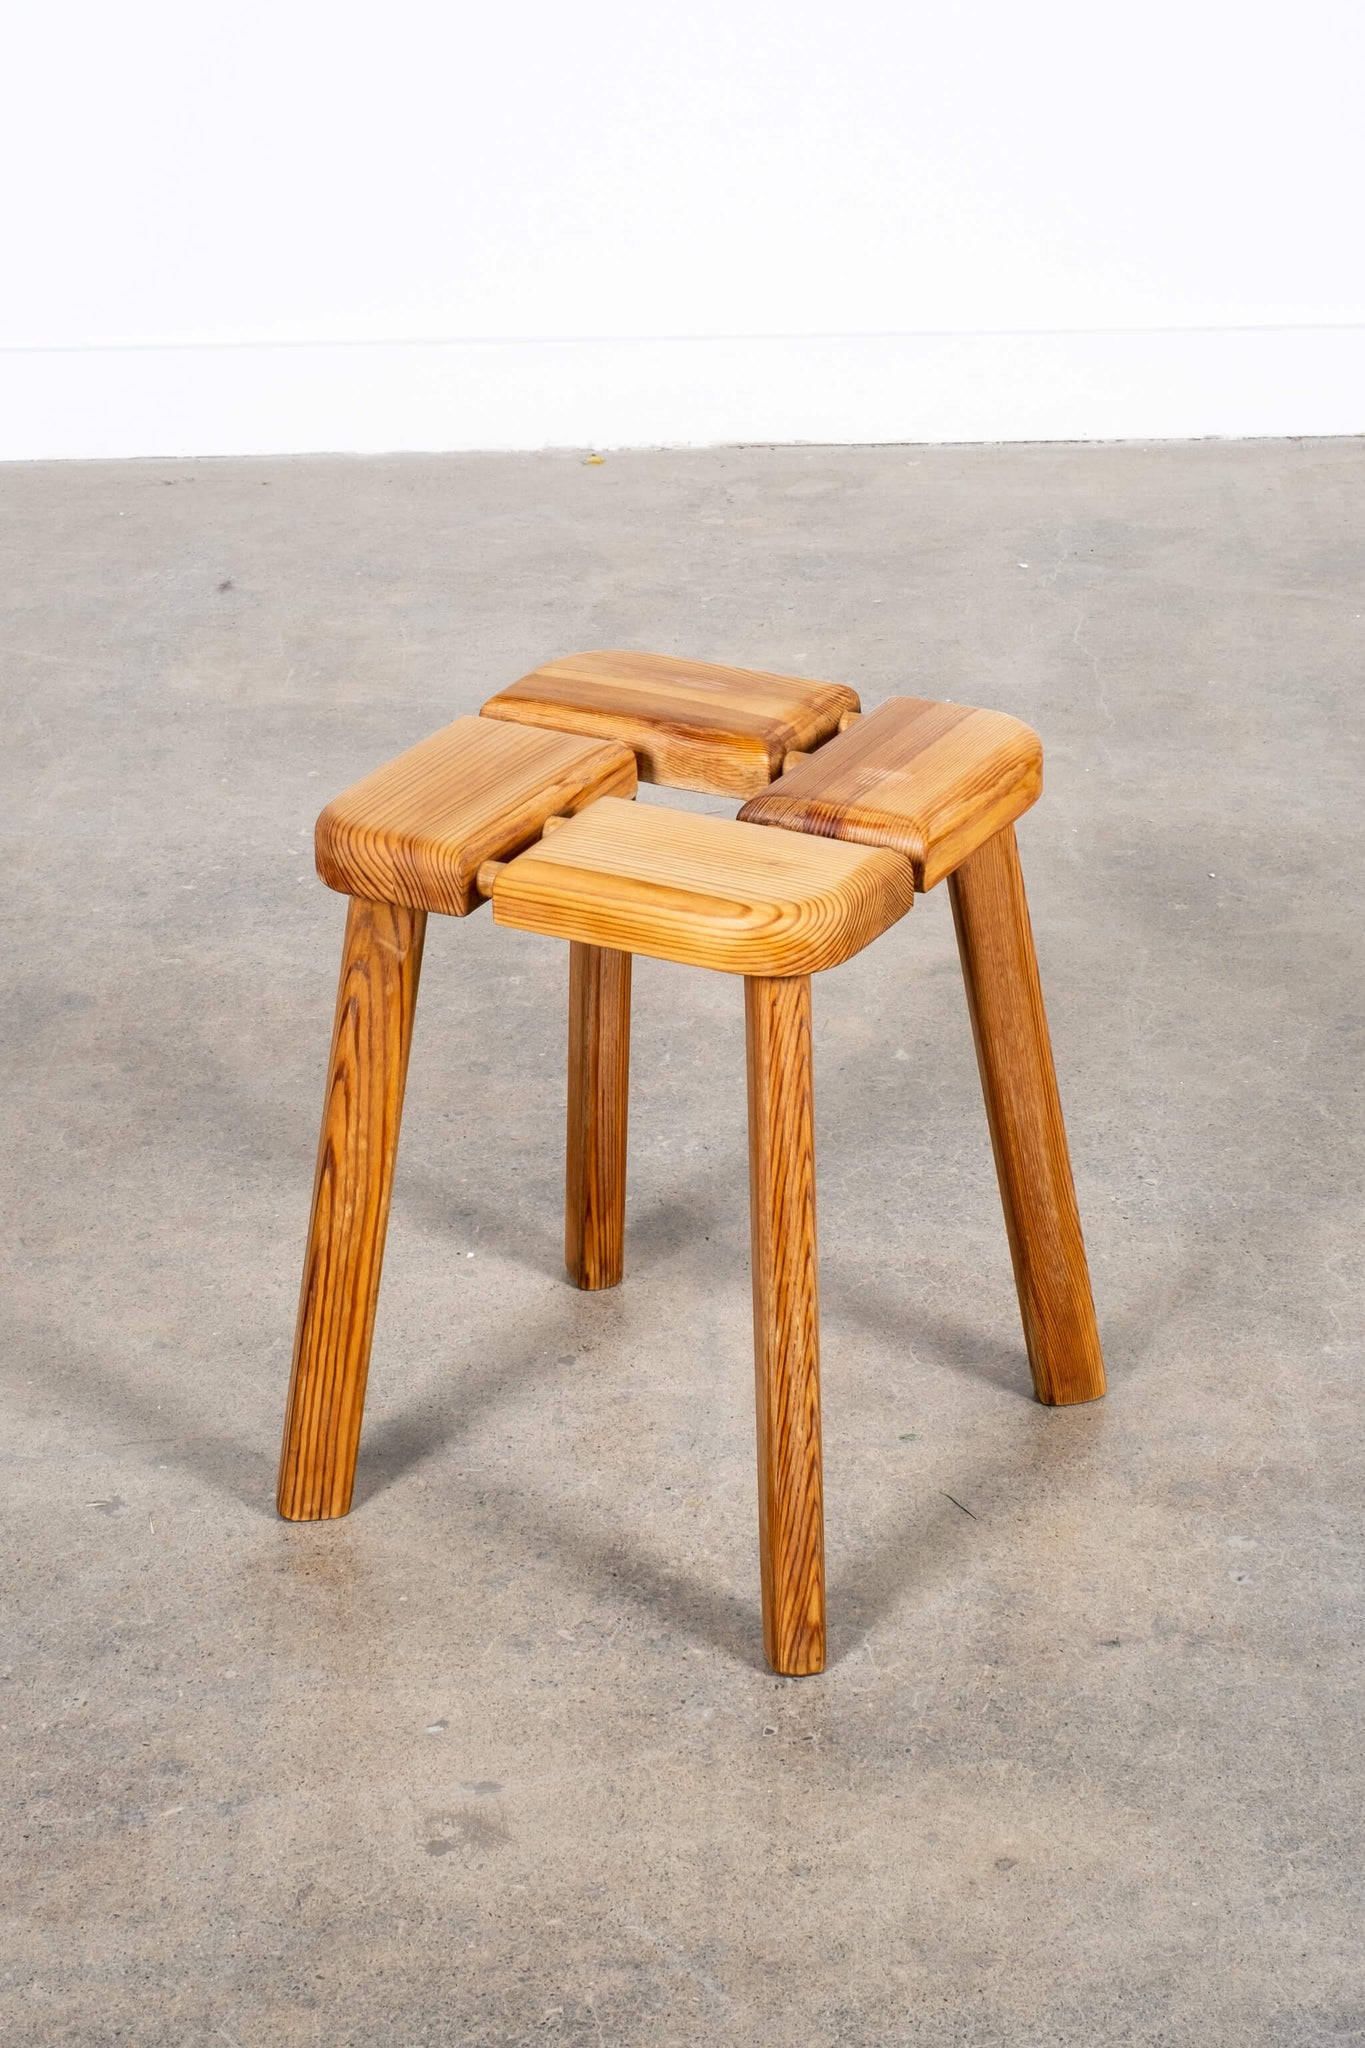 Vintage Pine Sauna Stool with Exposed Dowel Detail, front angled view